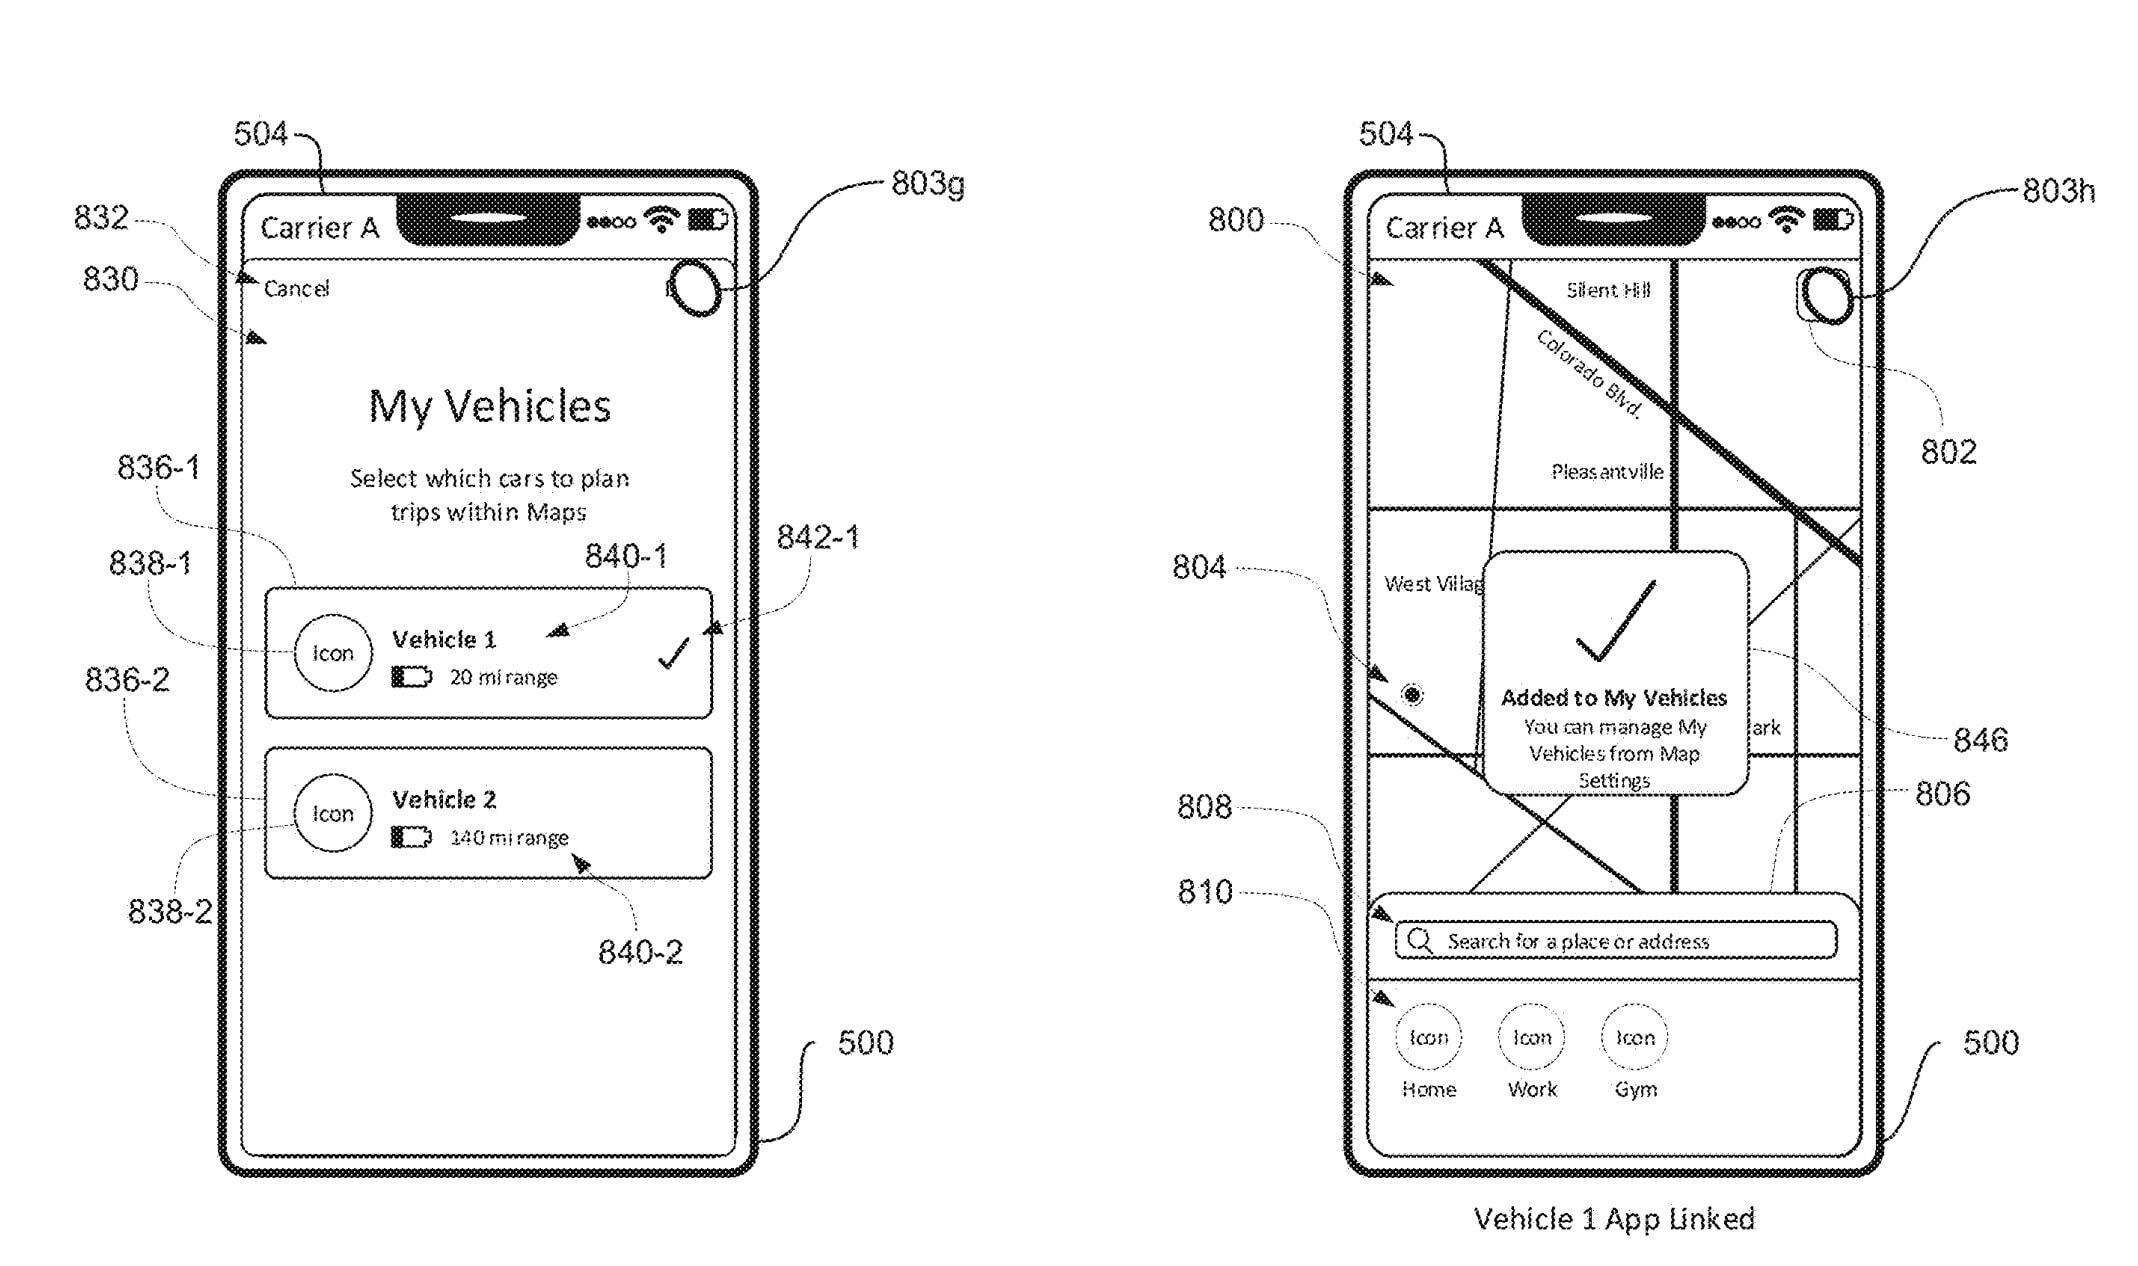 Apple patent application shows Apple Maps suggests different routes based on need to stop for fuel - Patent application reveals possible new Apple Maps features